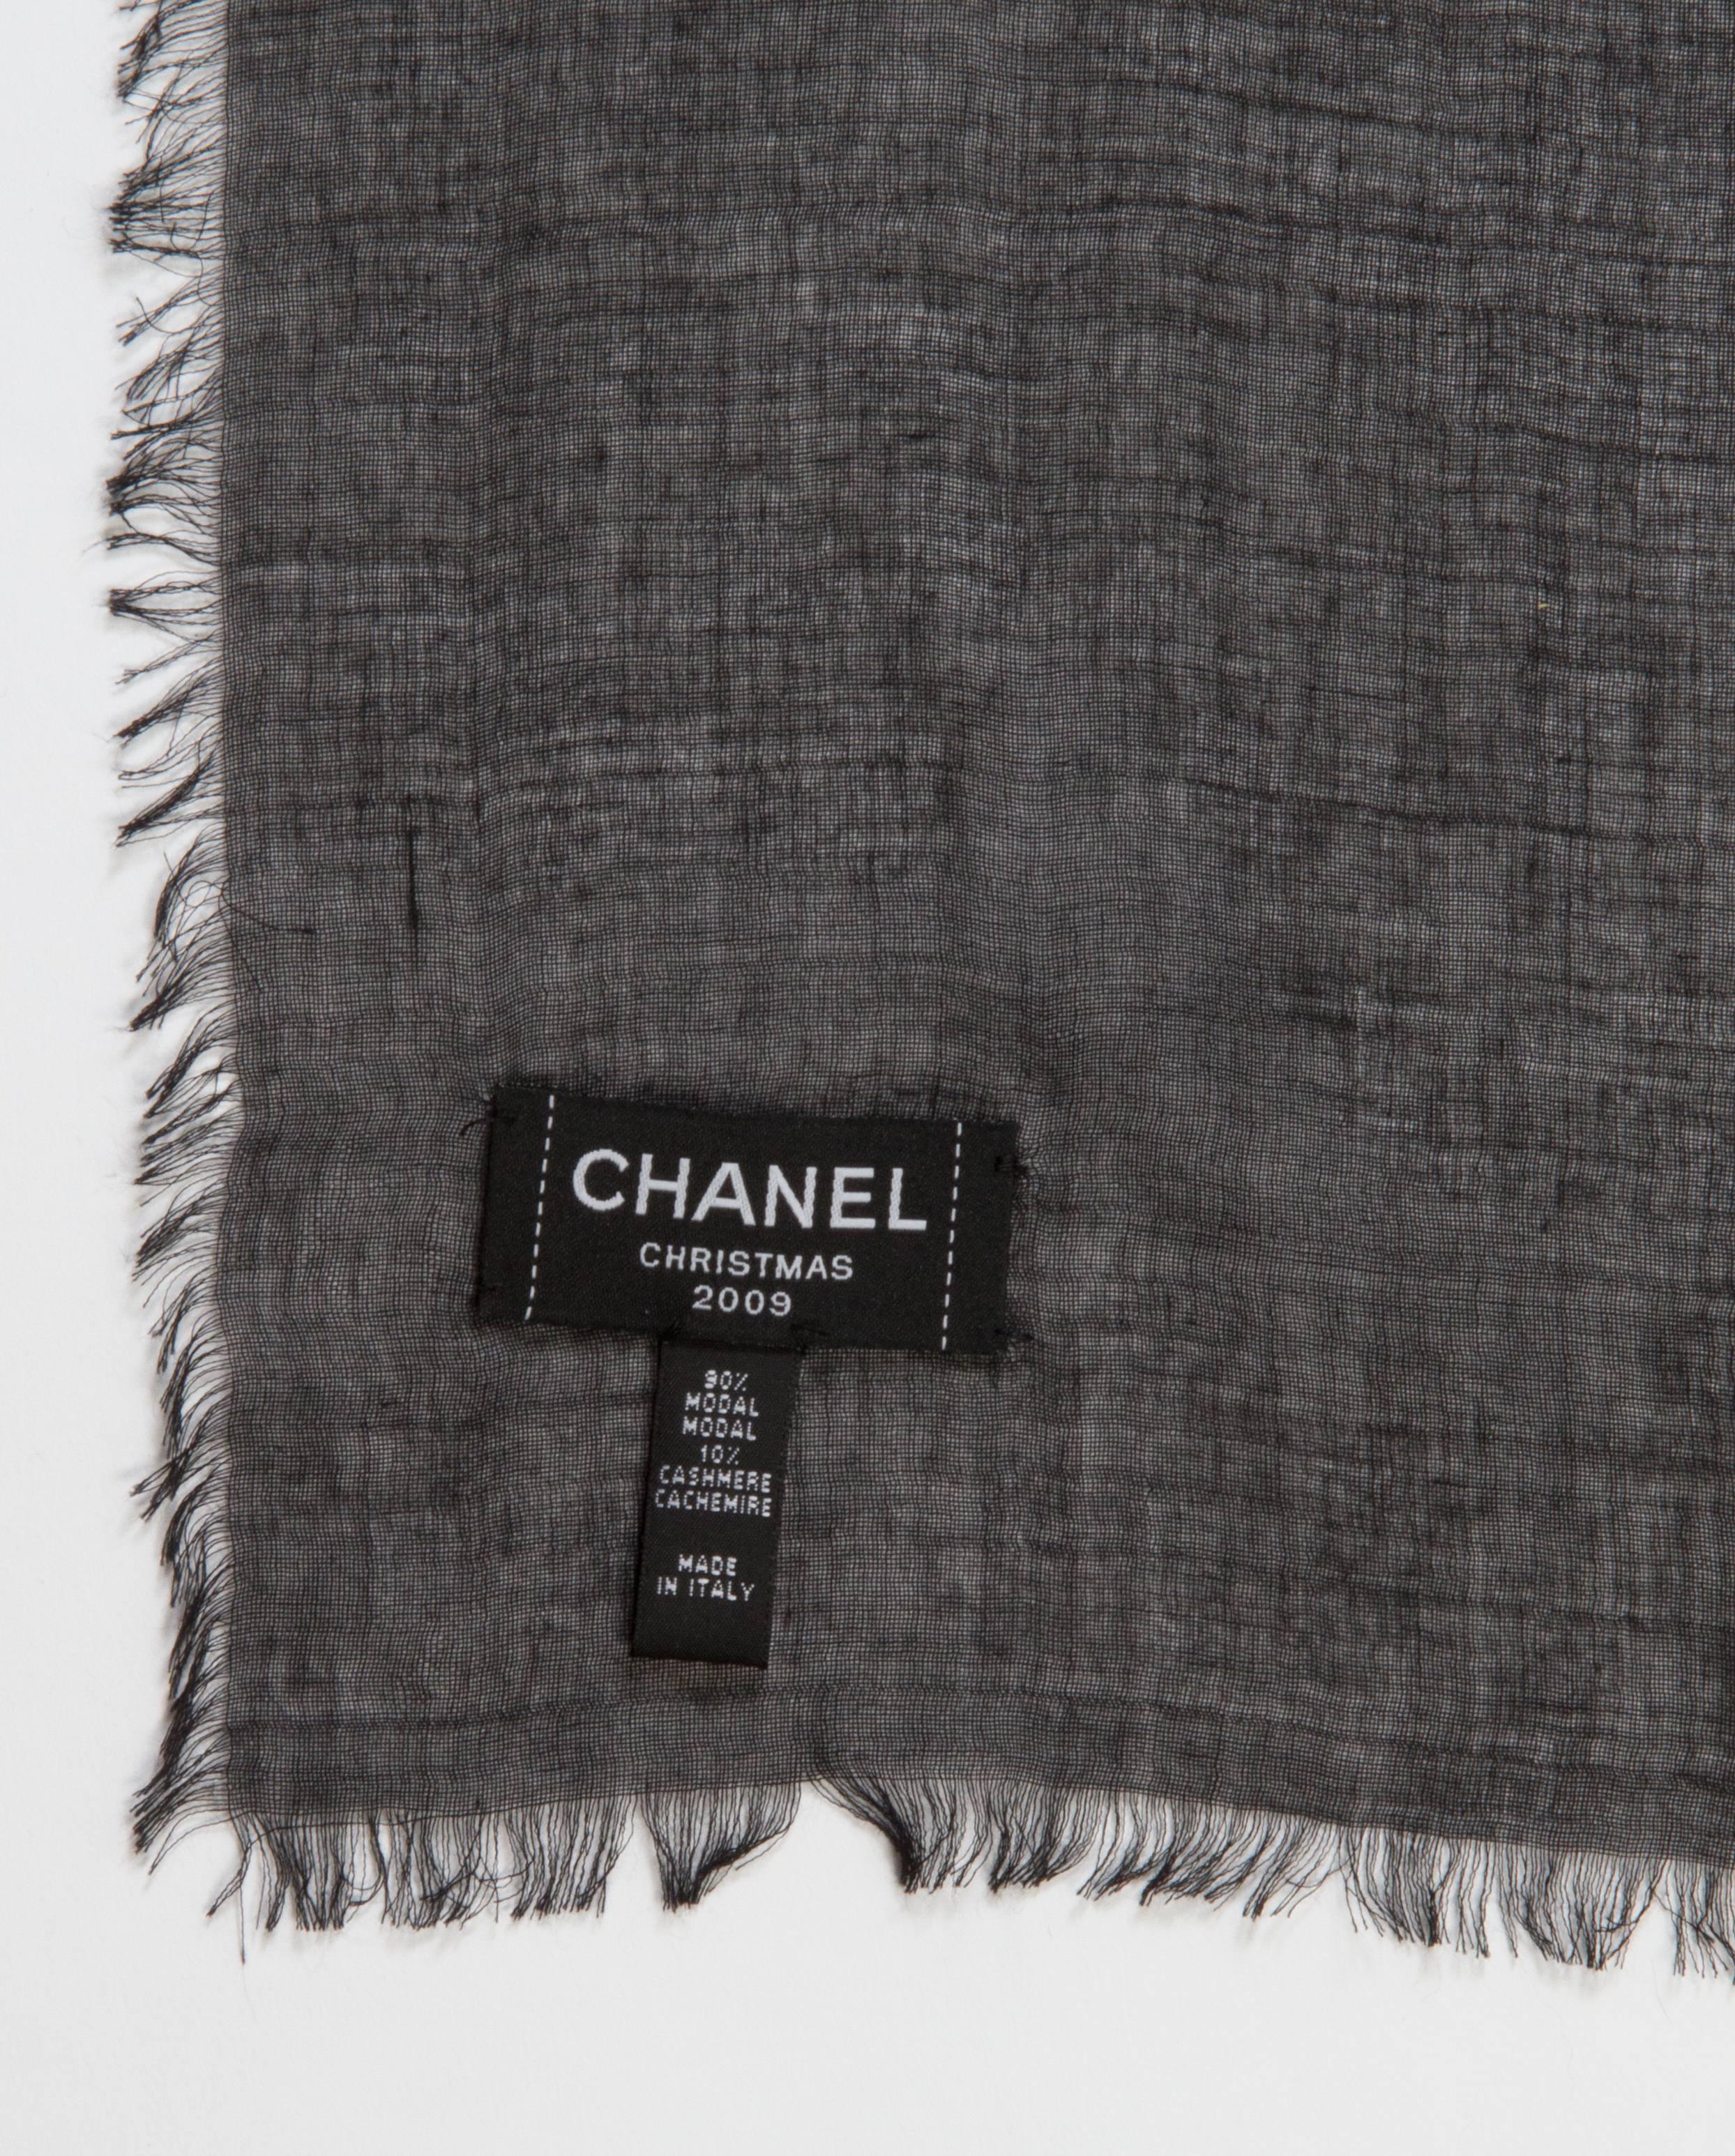 Pair of CHANEL Scarves  from the Christmas 2009 Collection 1